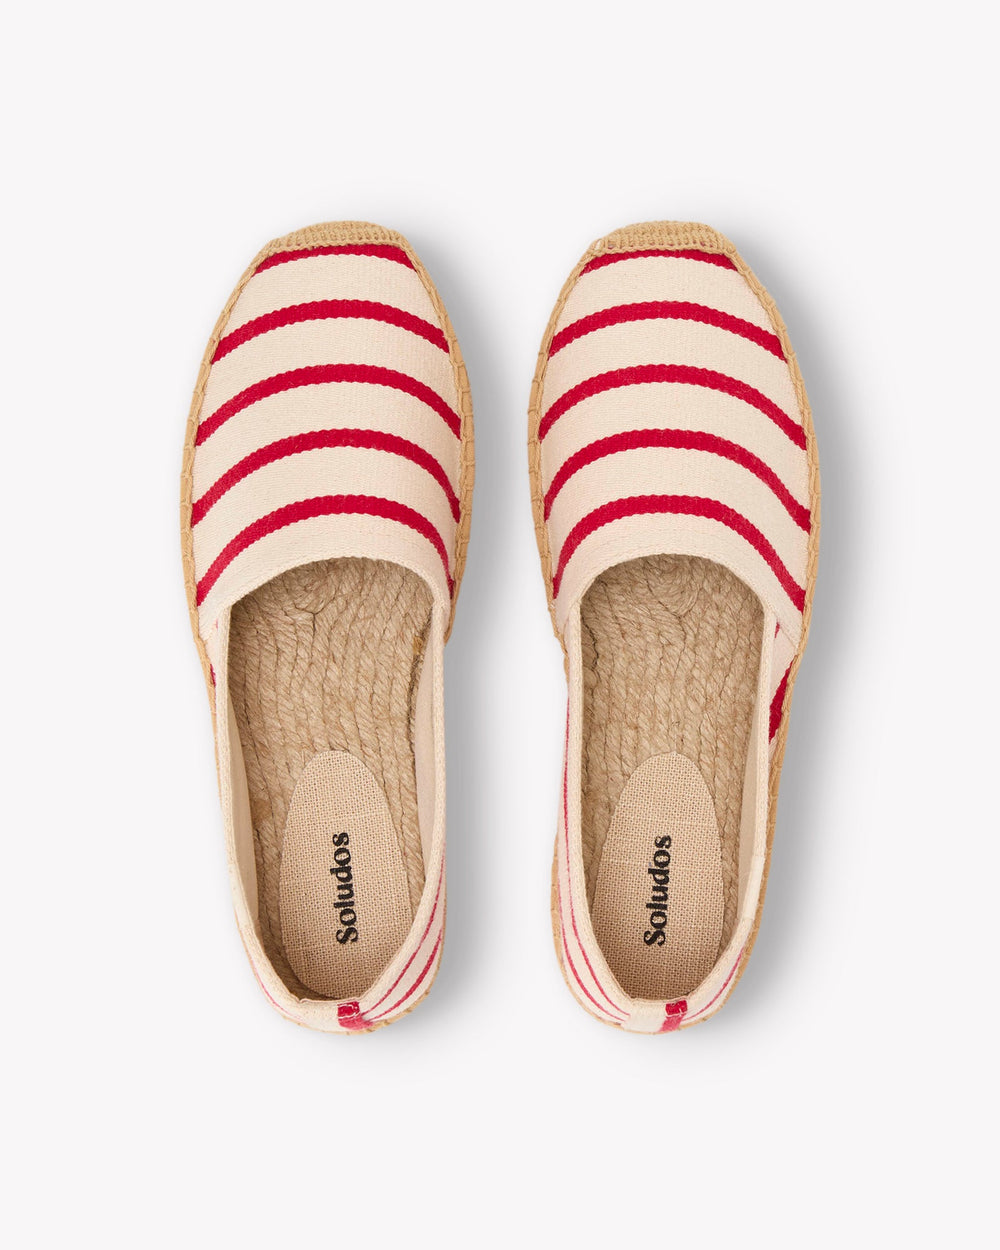 The Original Espadrille - Classic Stripes - Ivory / Red - Women's